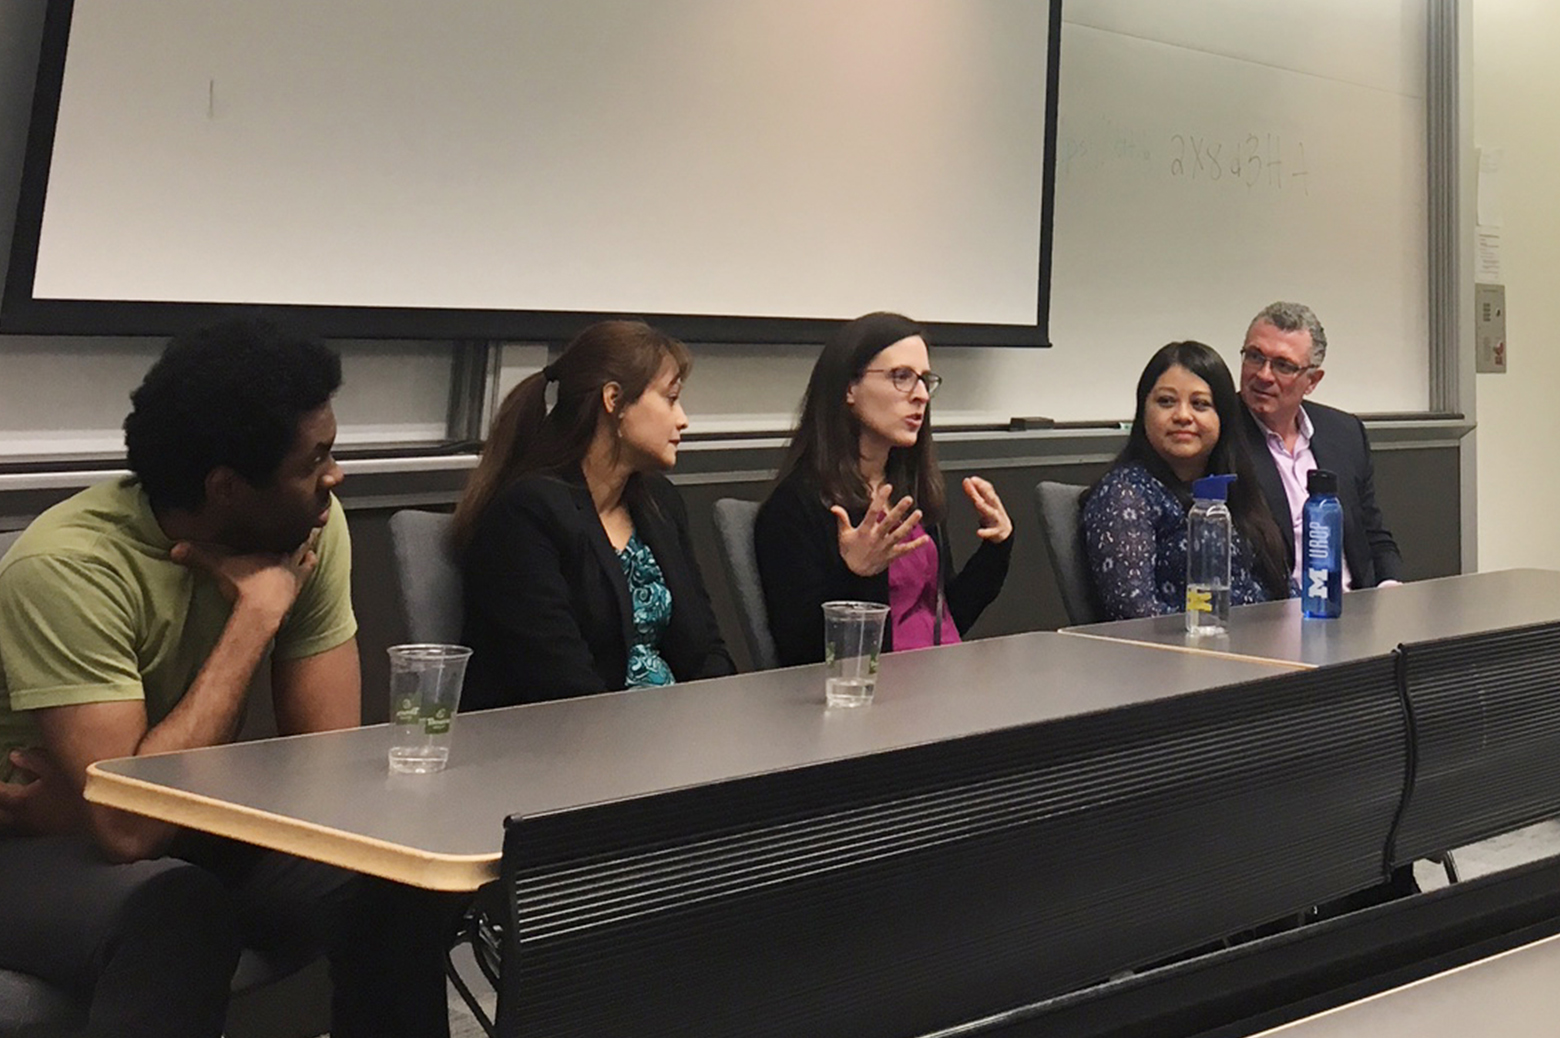 Career research panel